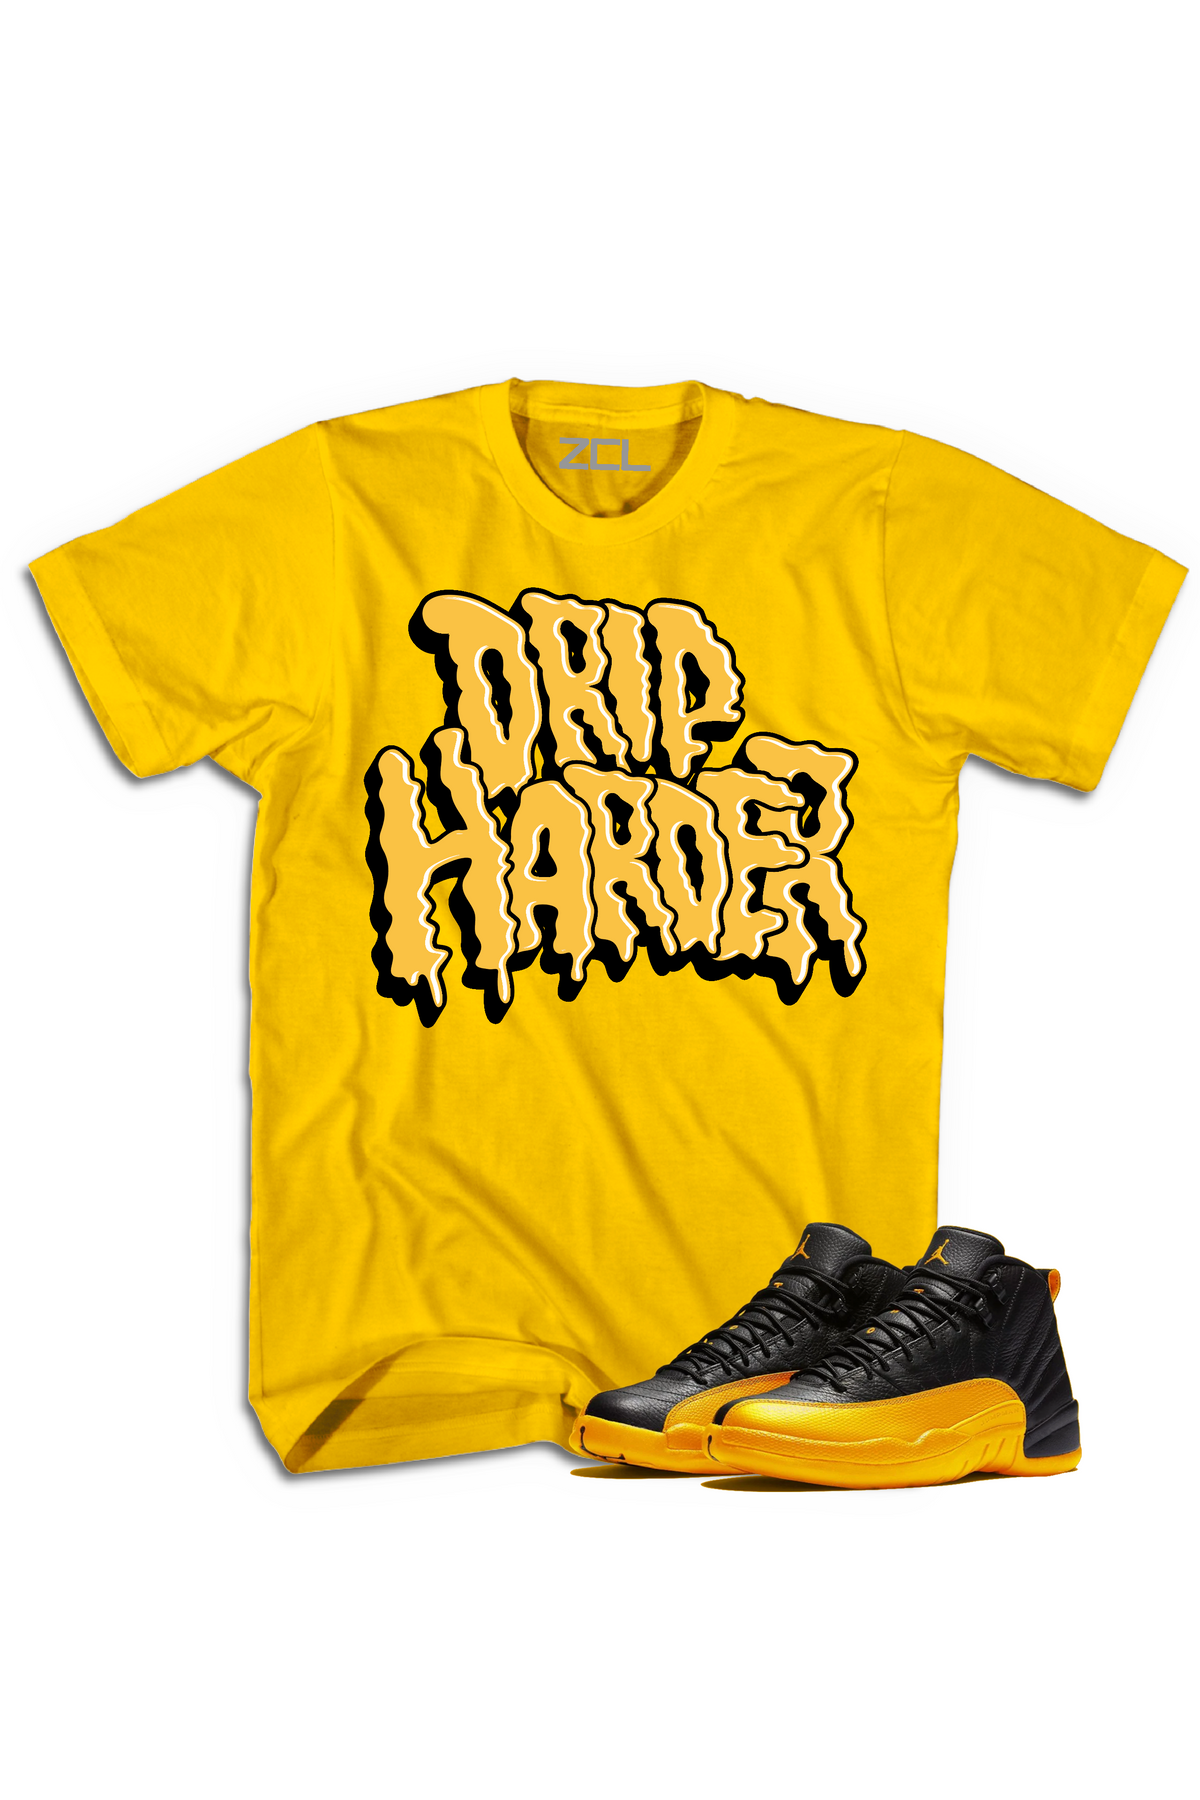 shirts to go with black and yellow 12s